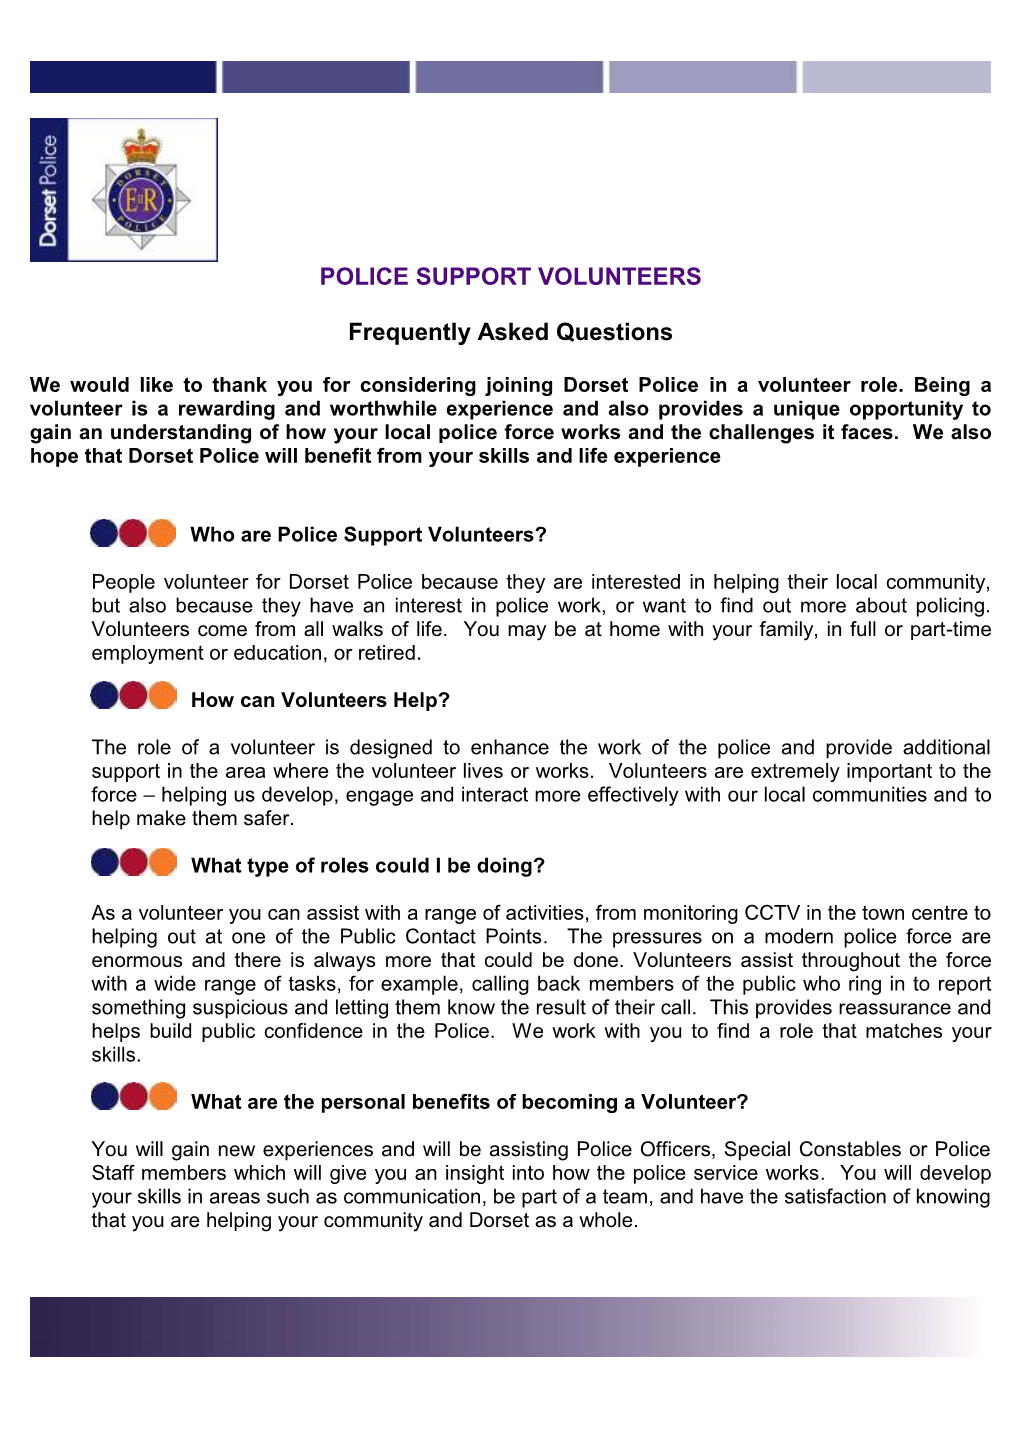 POLICE SUPPORT VOLUNTEERS Frequently Asked Questions